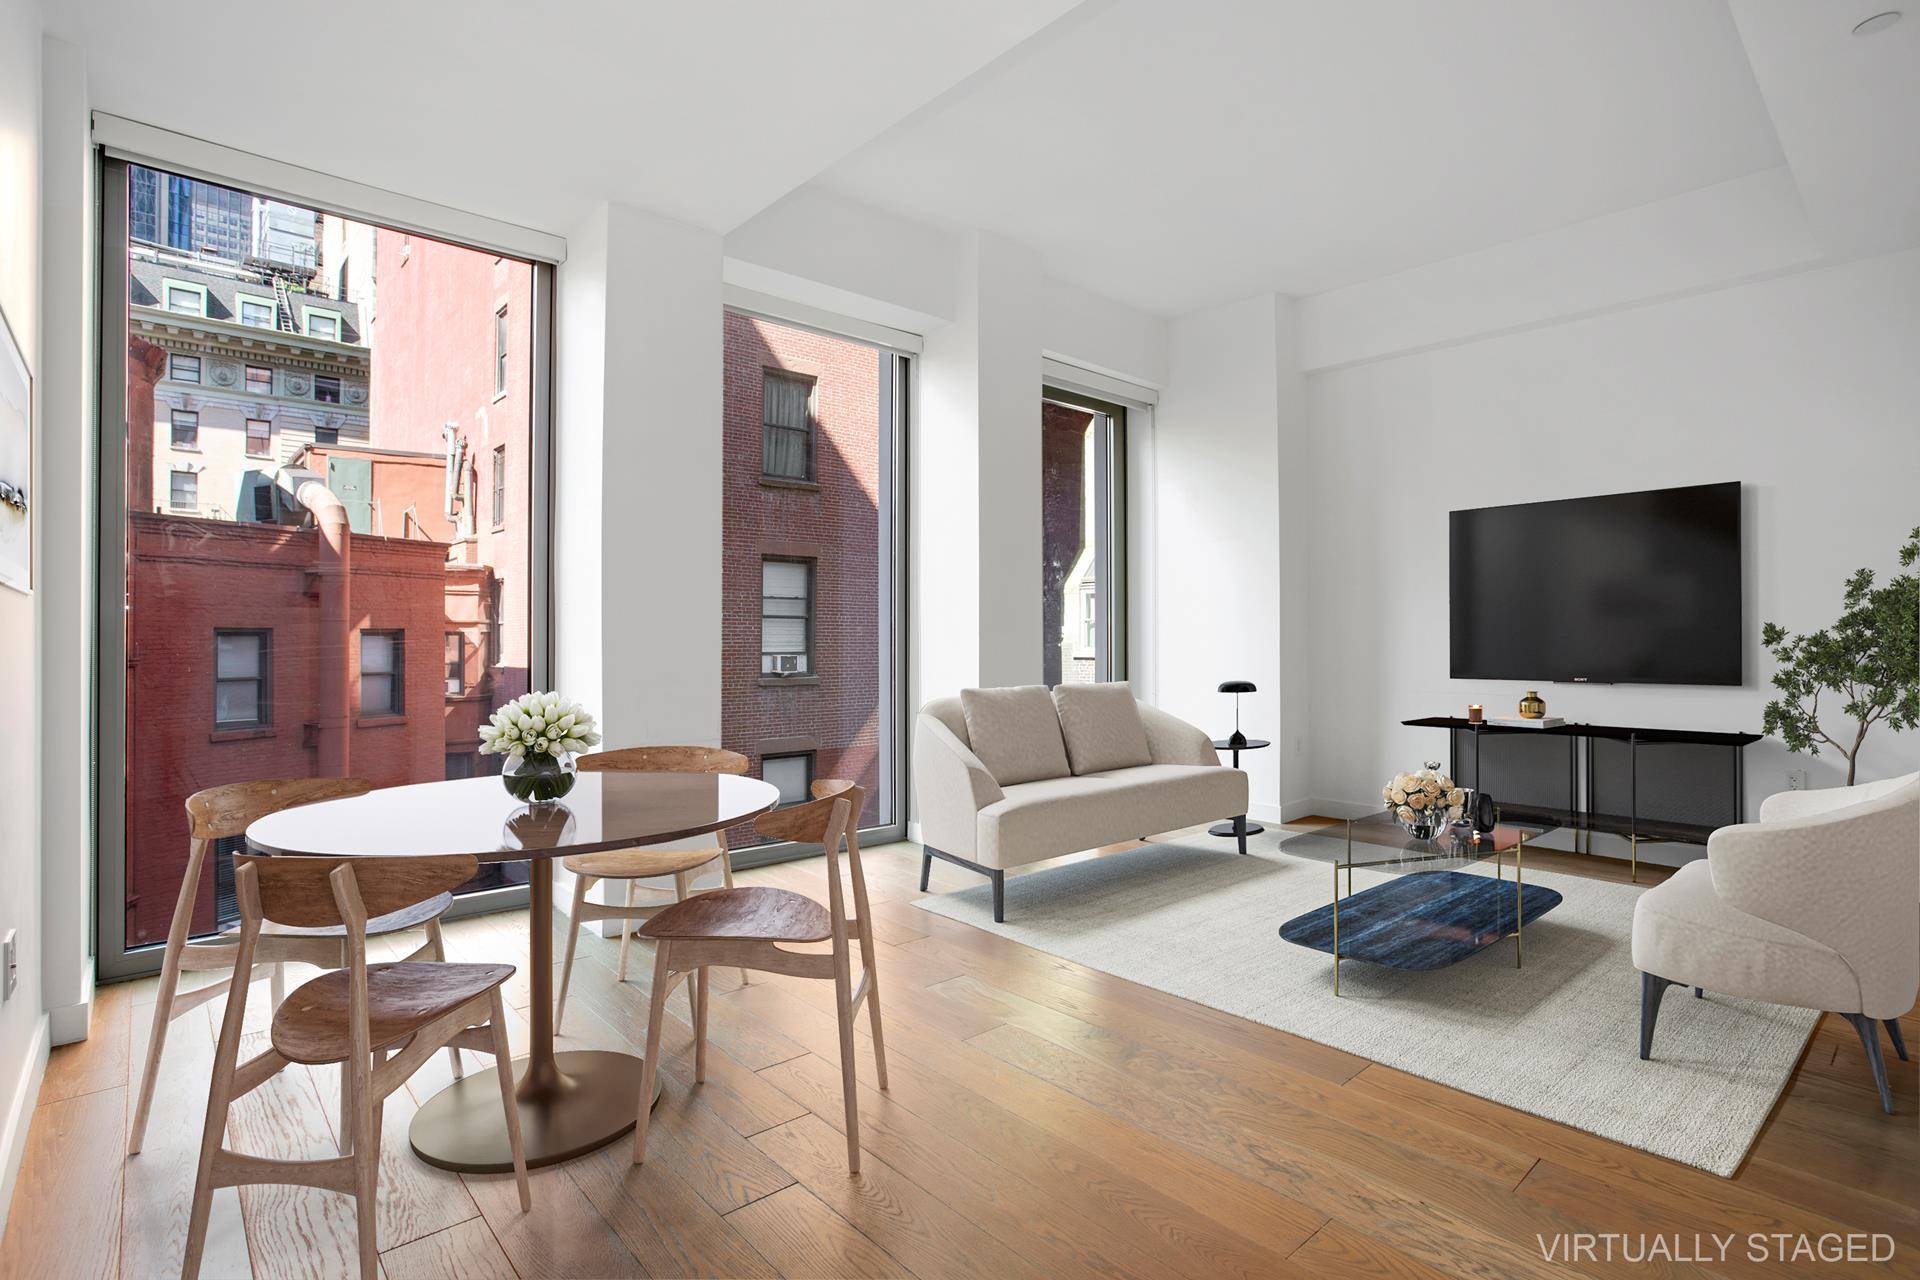 Pristine Condition South Facing New Development ResaleWelcome to 30 East 31, a beautiful Neo Gothic building in the trendy NoMad neighborhood North of Madison Square Park.